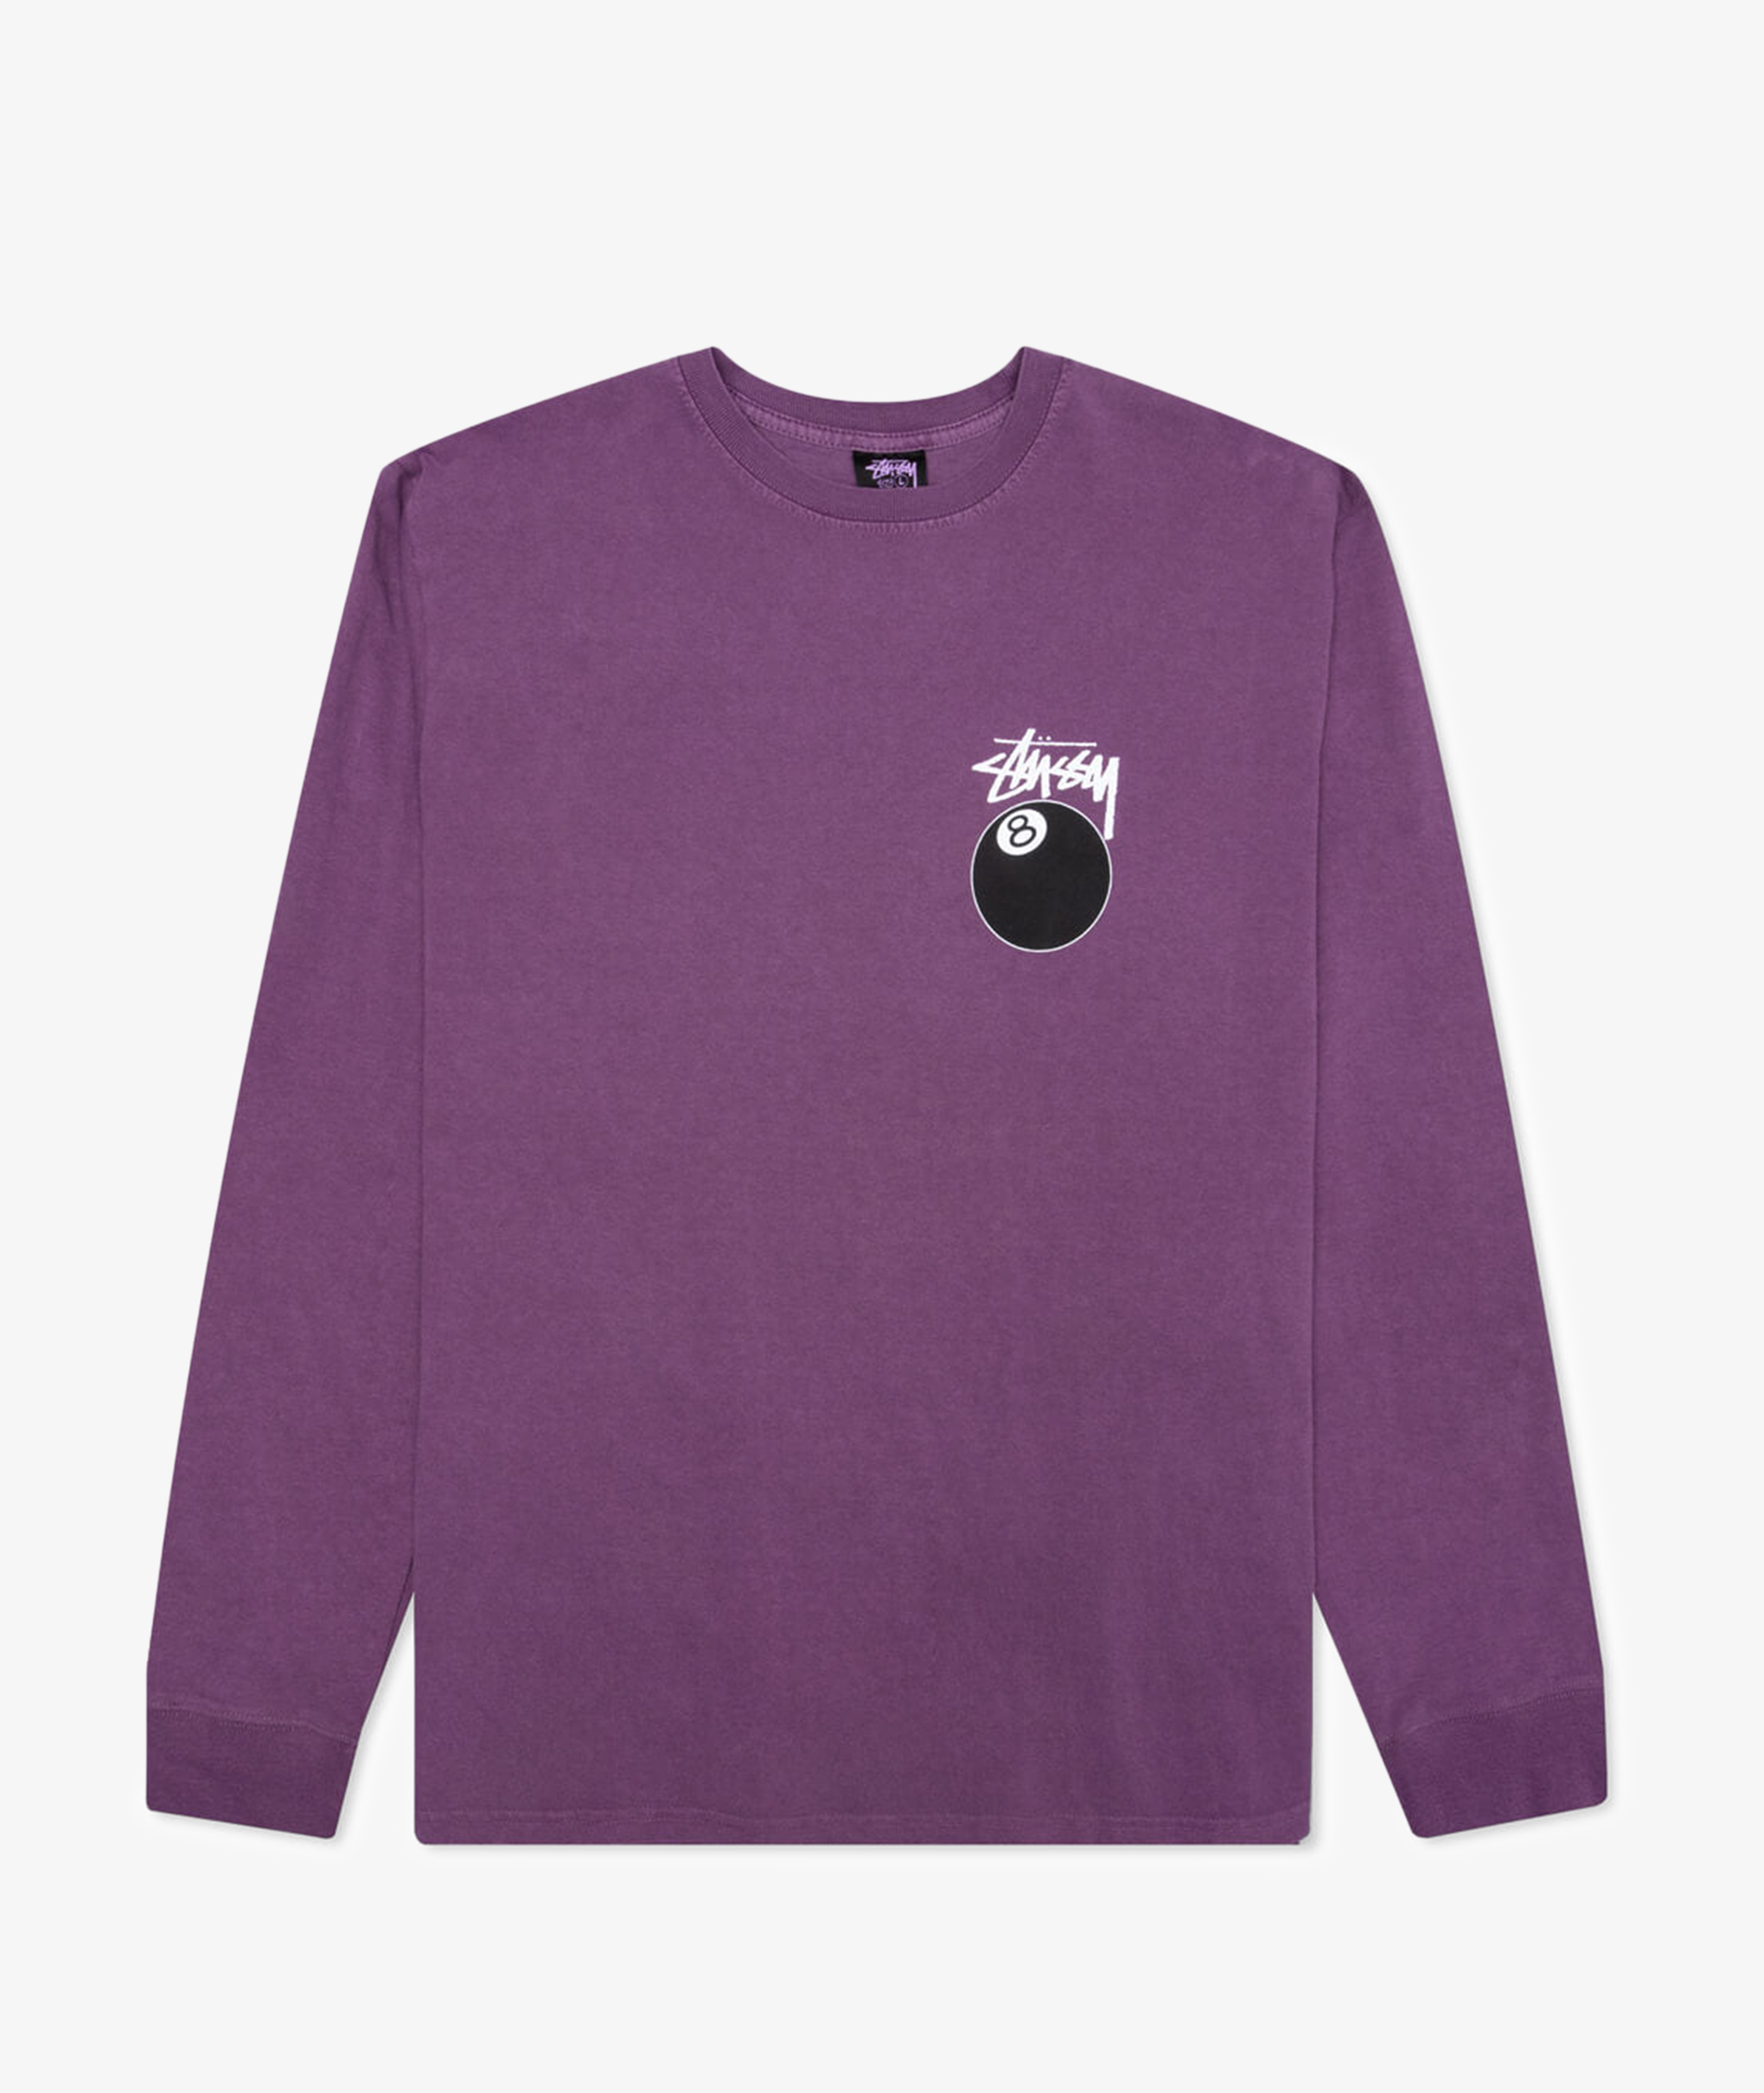 Norse Store | Shipping Worldwide - Stüssy 8 Ball pigment Dyed LS Tee ...